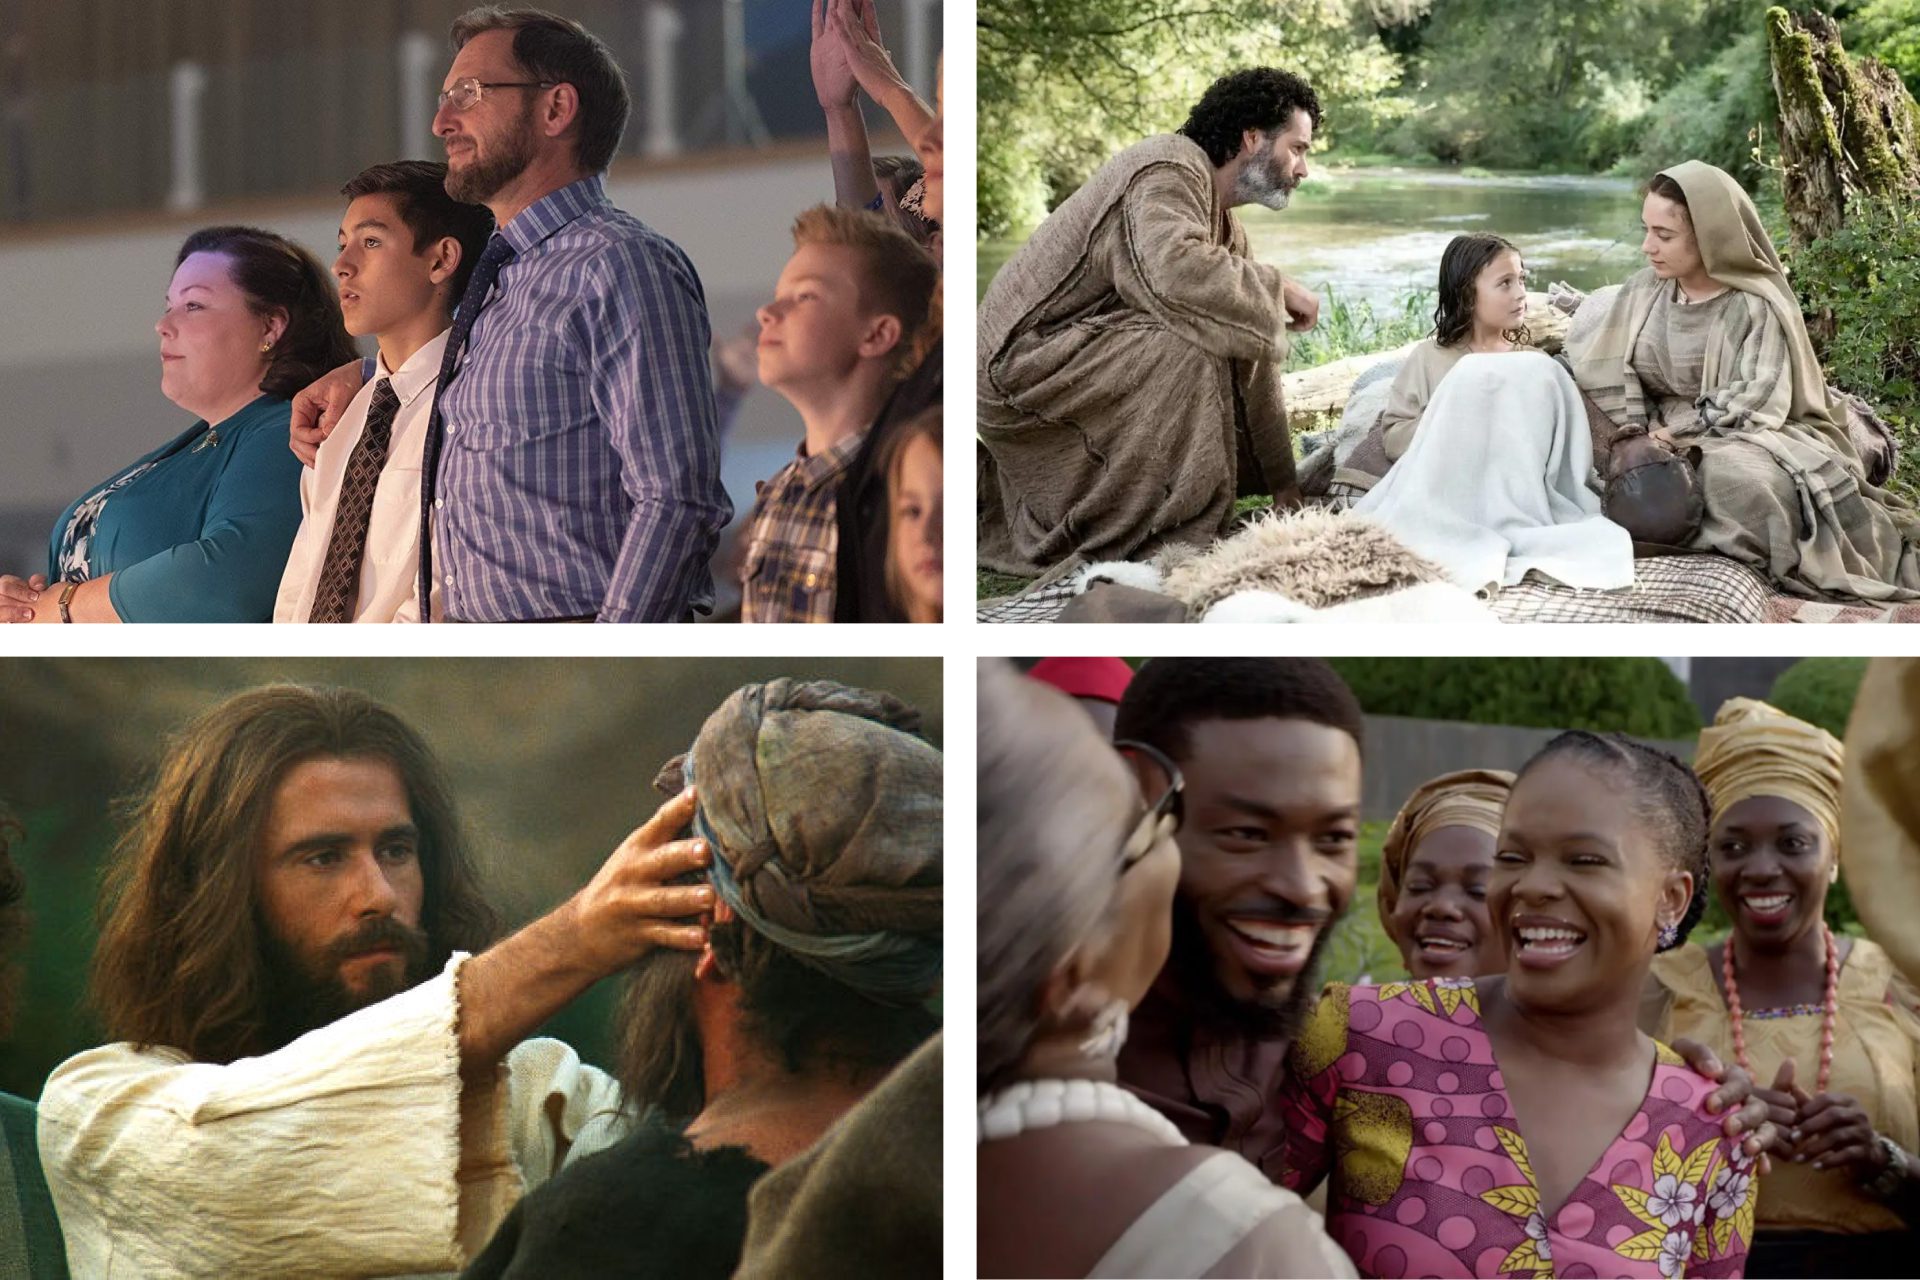 20 Best Christian Movies A Collection of Inspiring and FaithBased Films